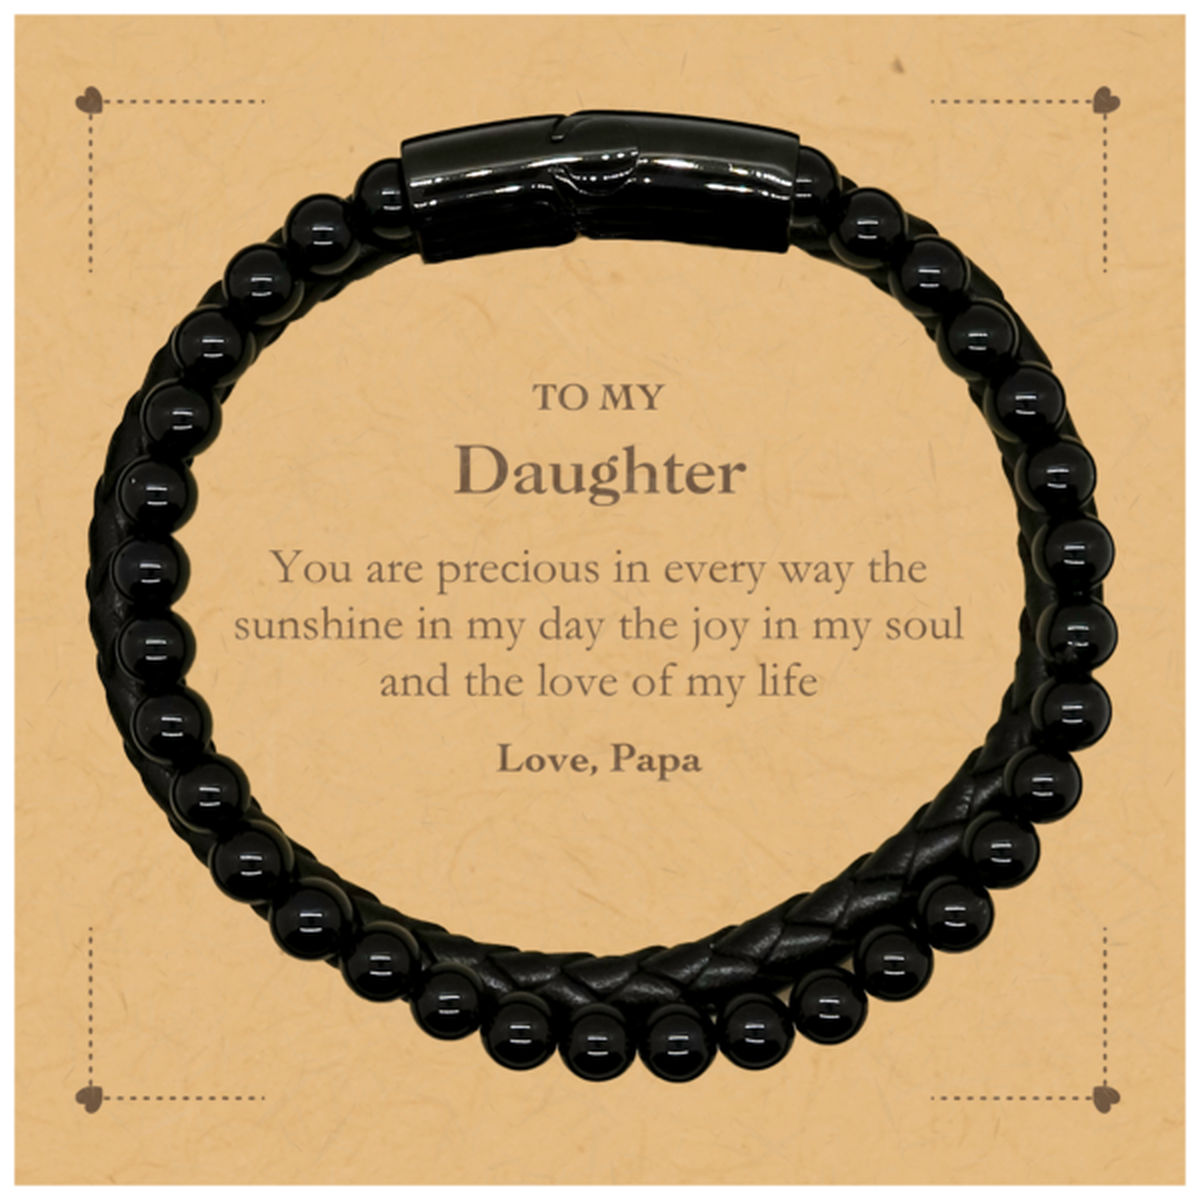 Graduation Gifts for Daughter Stone Leather Bracelets Present from Papa, Christmas Daughter Birthday Gifts Daughter You are precious in every way the sunshine in my day. Love, Papa